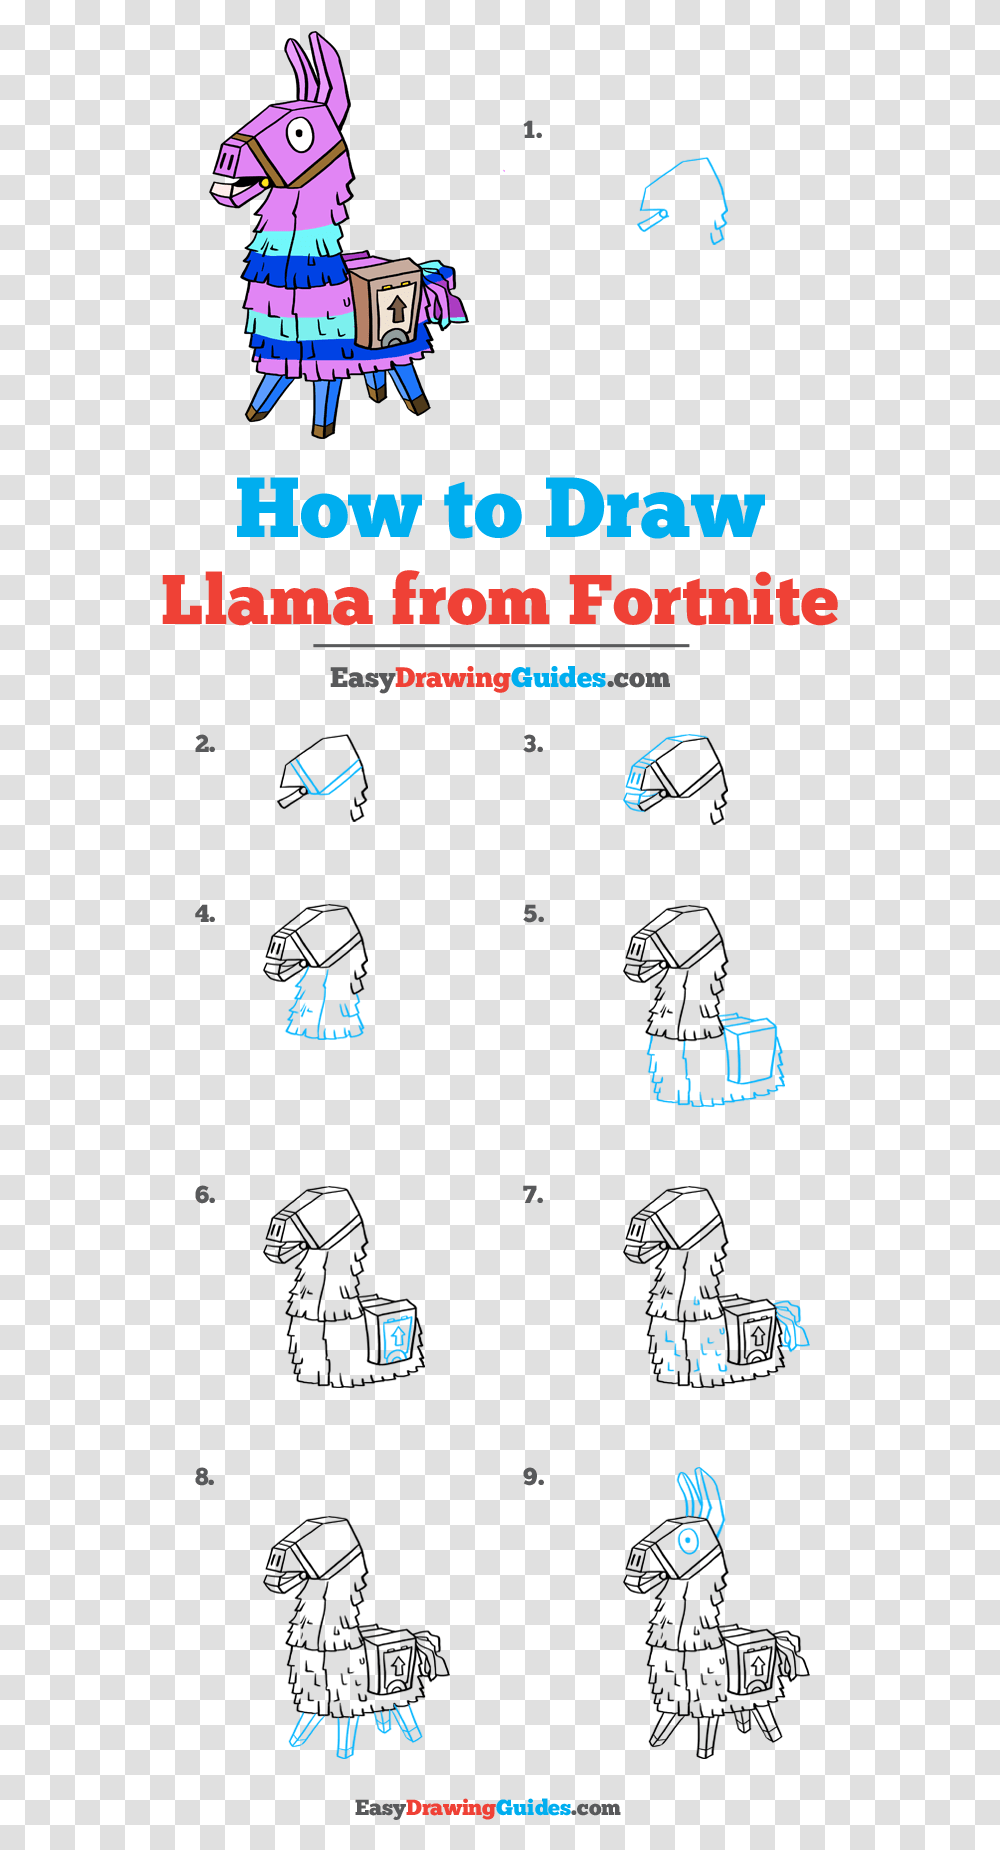 How To Draw Llama From Fortnite Draw A Llama From Fortnite, Plot, Poster, Diagram Transparent Png